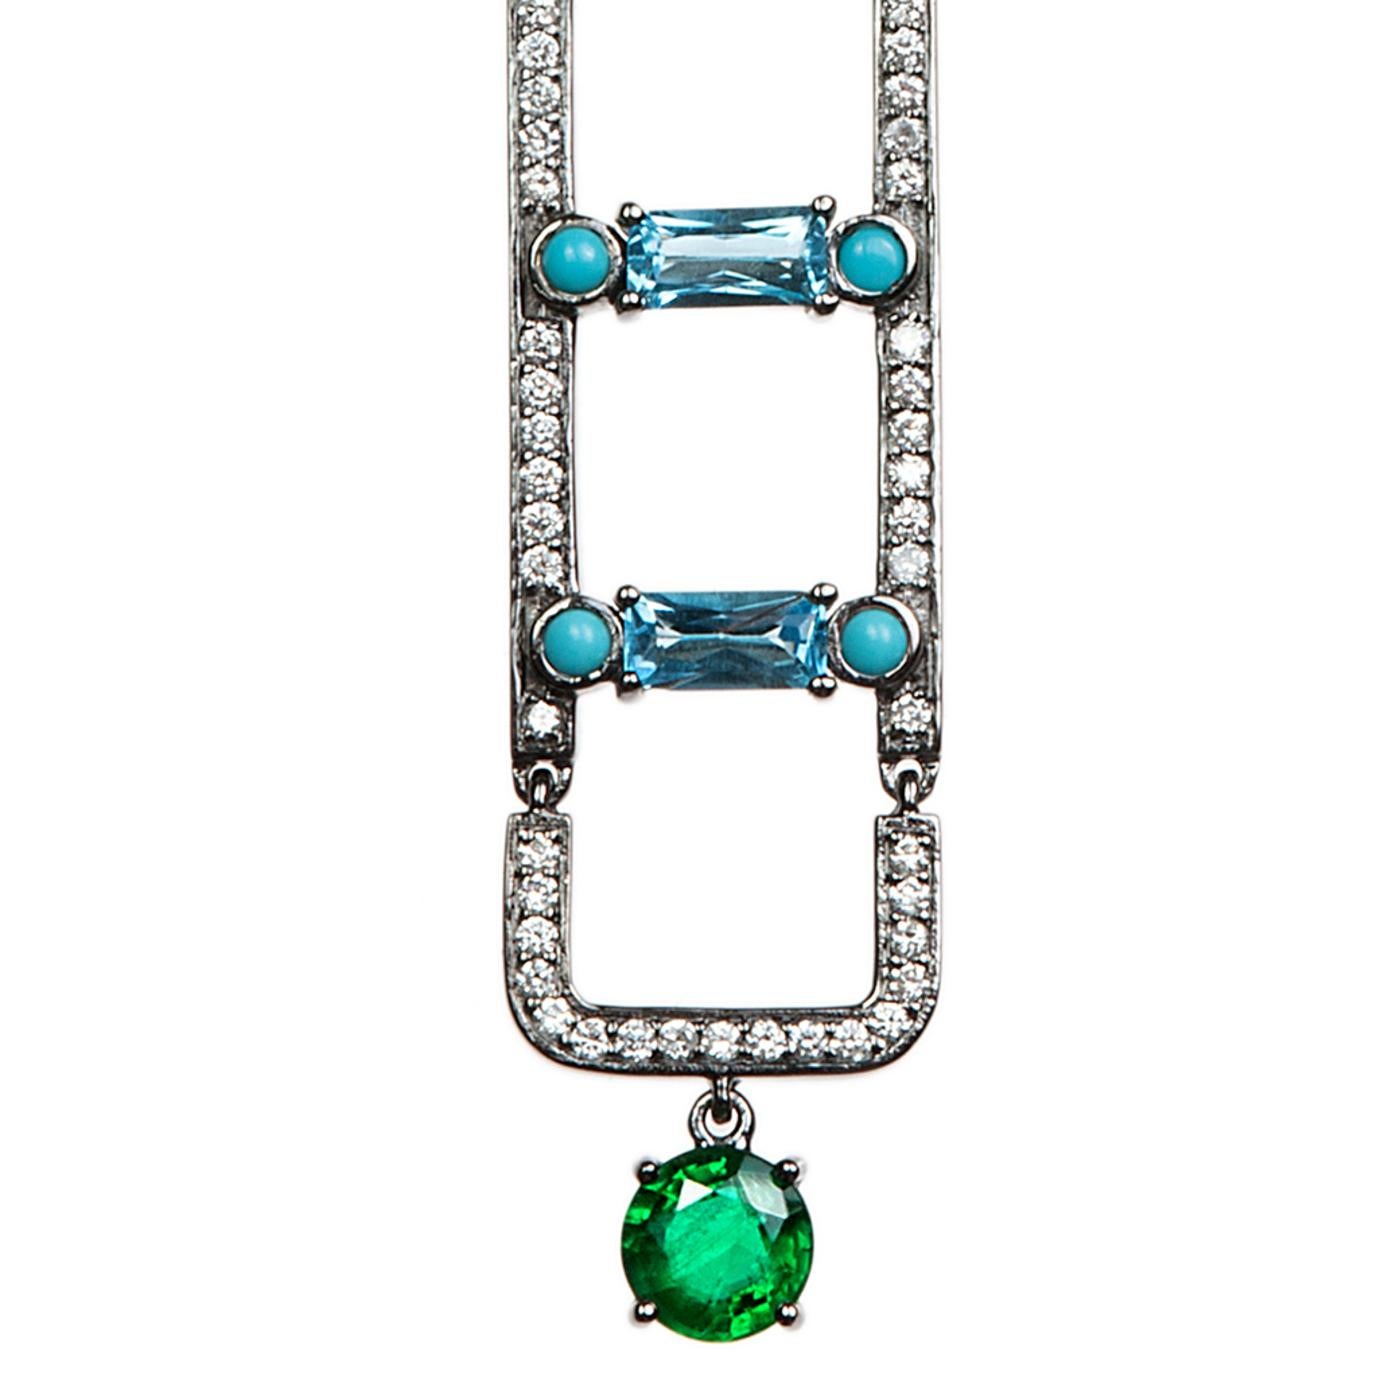 Nikos Koulis Eden Collection one-of-a-kind 18K white gold earrings with 1.38 cts white diamonds, 1.4 cts emeralds, 4.5 cts blue topazes, 0.5 cts turquoises